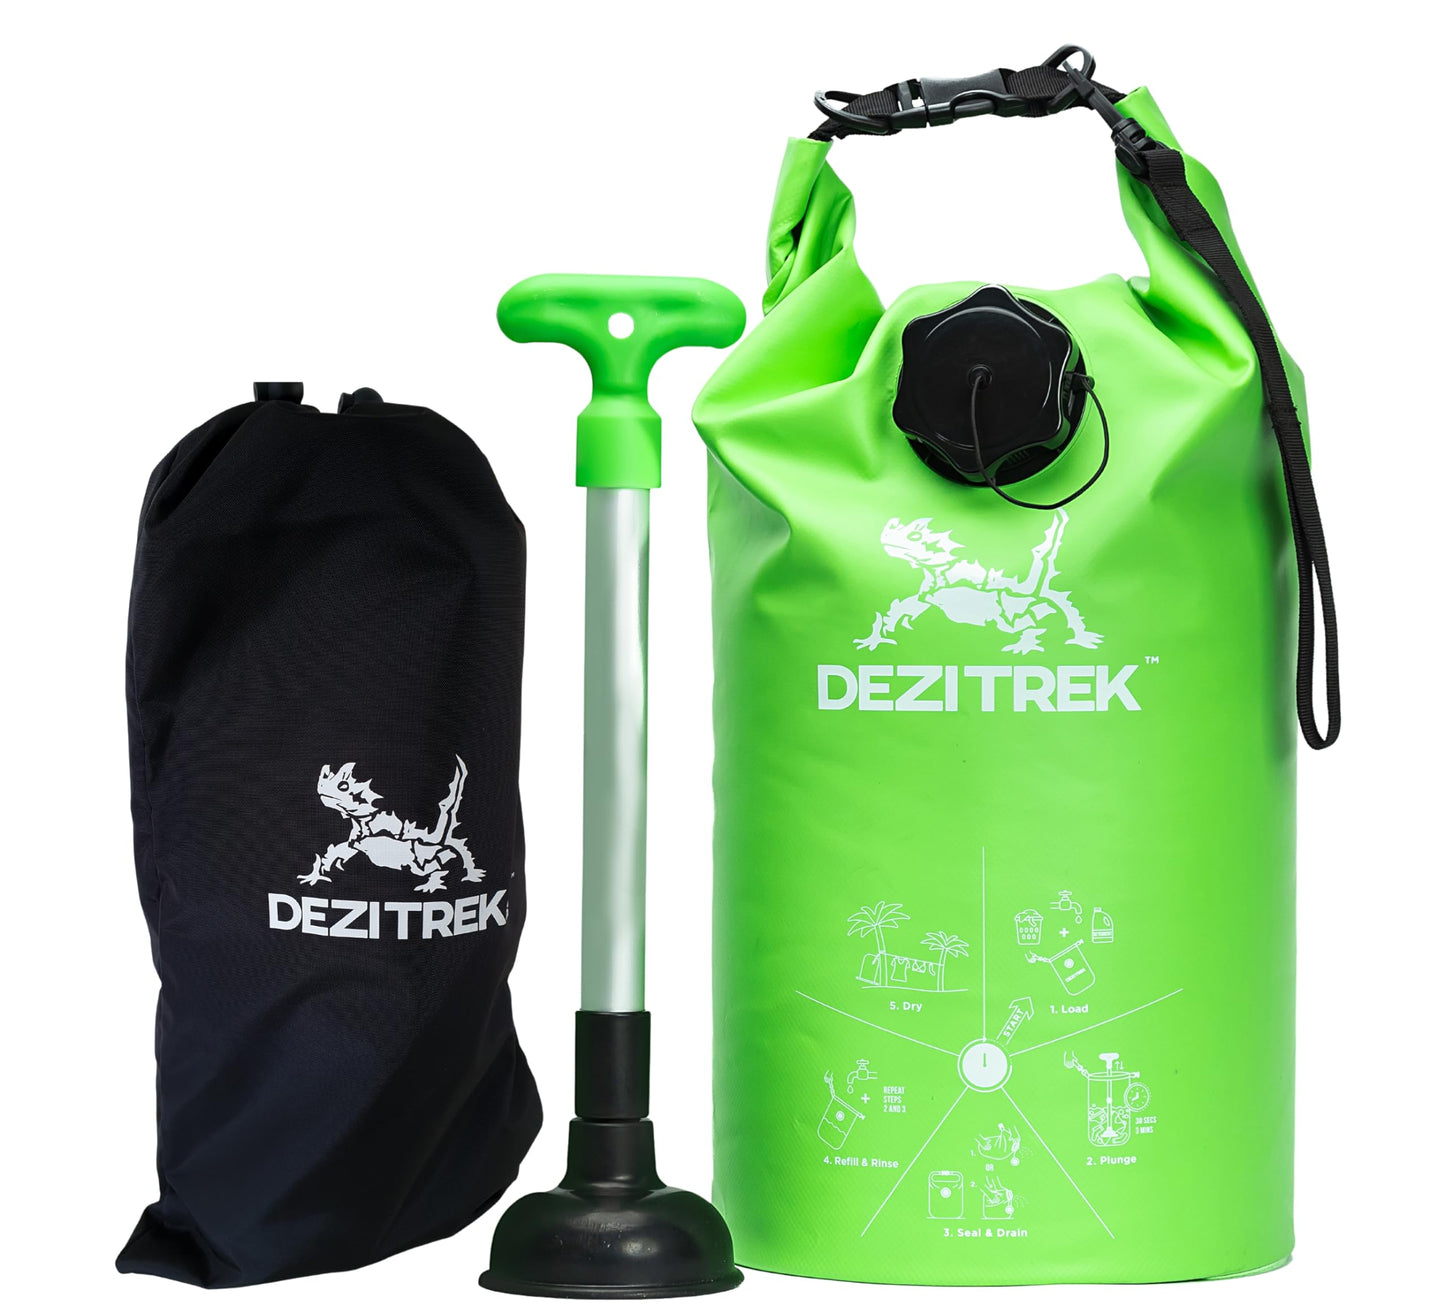 Dezitrek LARGE All in One Hand Wash Bag and Plunger Set - Off Grid Washing Machine Non Electric for Camping Travel | Eco Friendly Portable Manual Clothes Washer Laundry Bag for RV's, Apartments